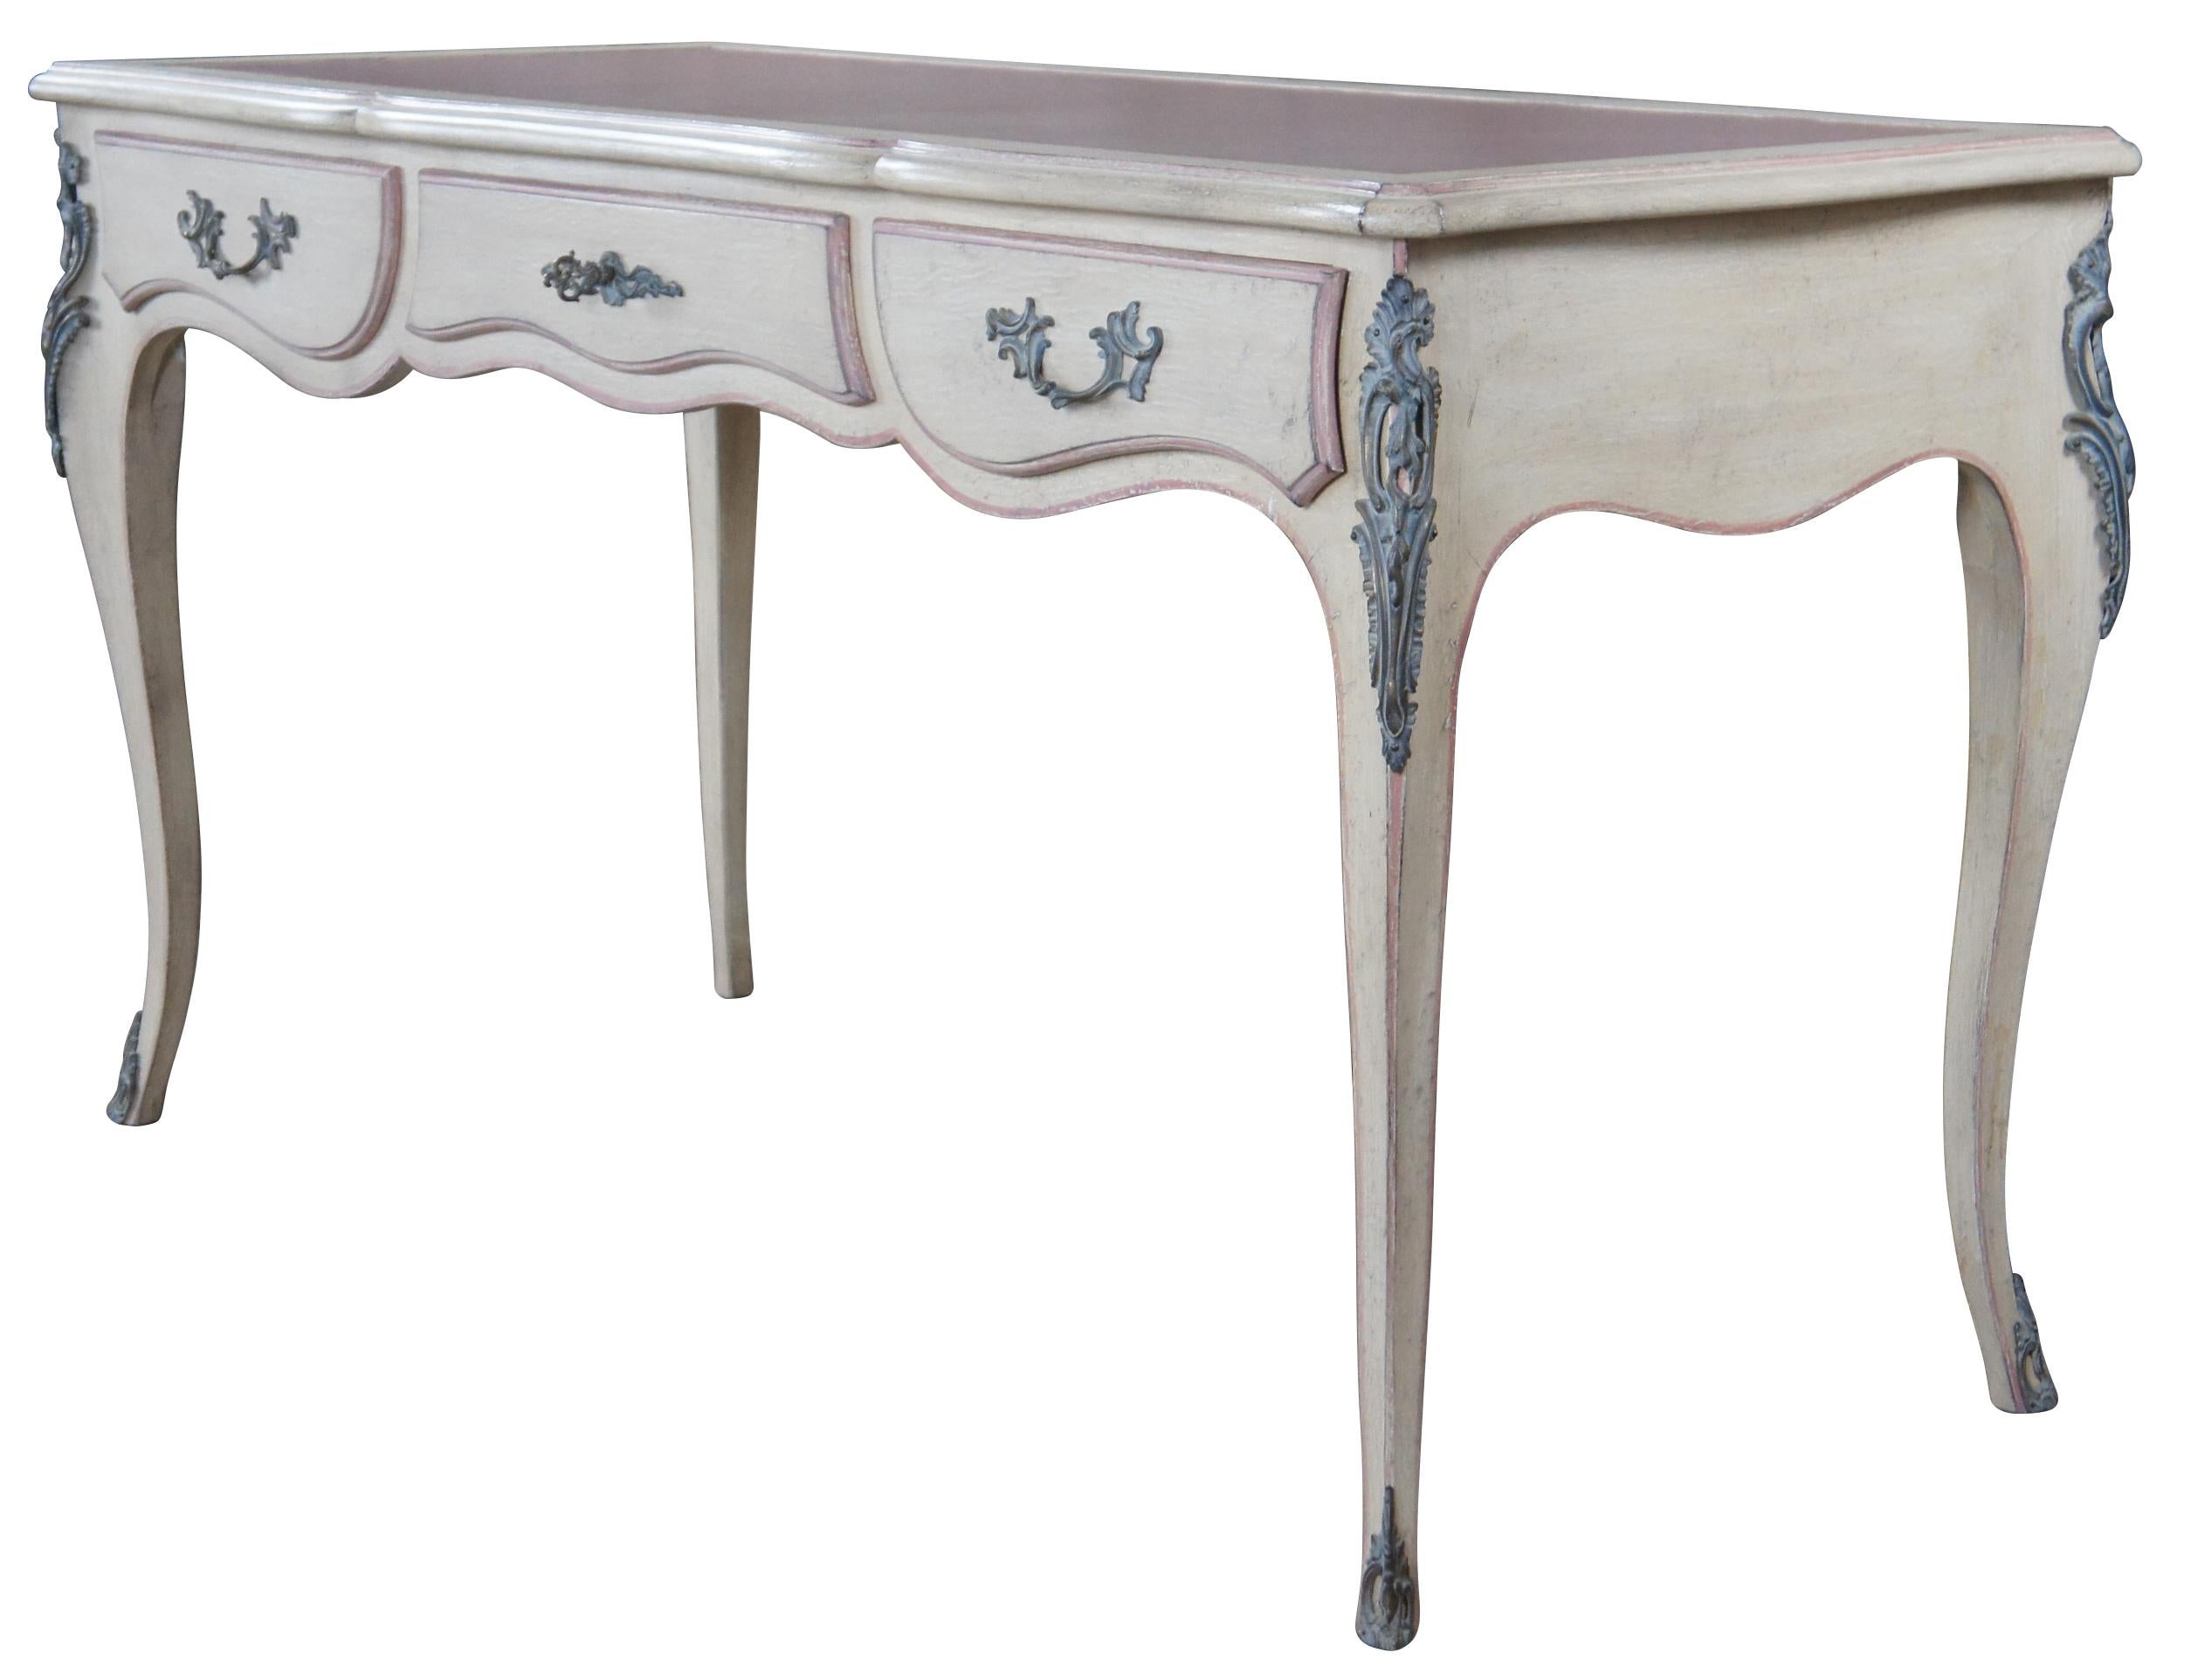 Custom ordered French Provincial Bureau Plat or lady's writing desk by Auffray & Company. Features a shaped serpentine top with pink tooled leather, a frieze fitted with three drawers and ornate bronze ormolu mounts, raised over cabriole legs. Made